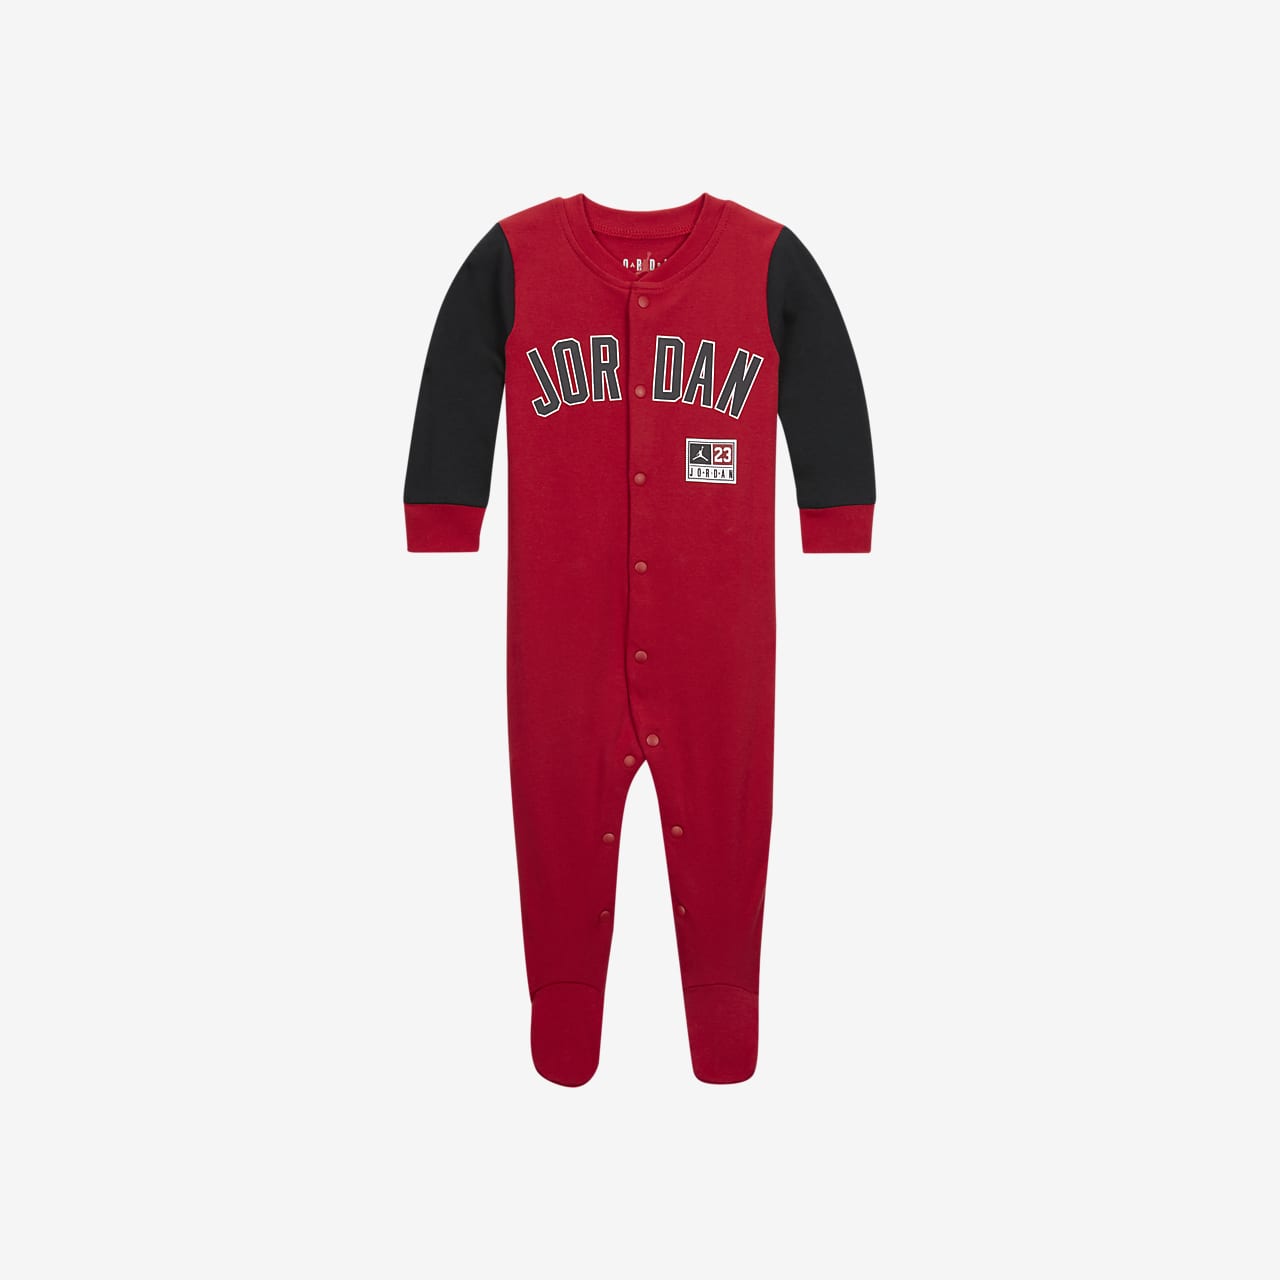 Jordan Baby (0-9M) Footed Coverall. Nike.com